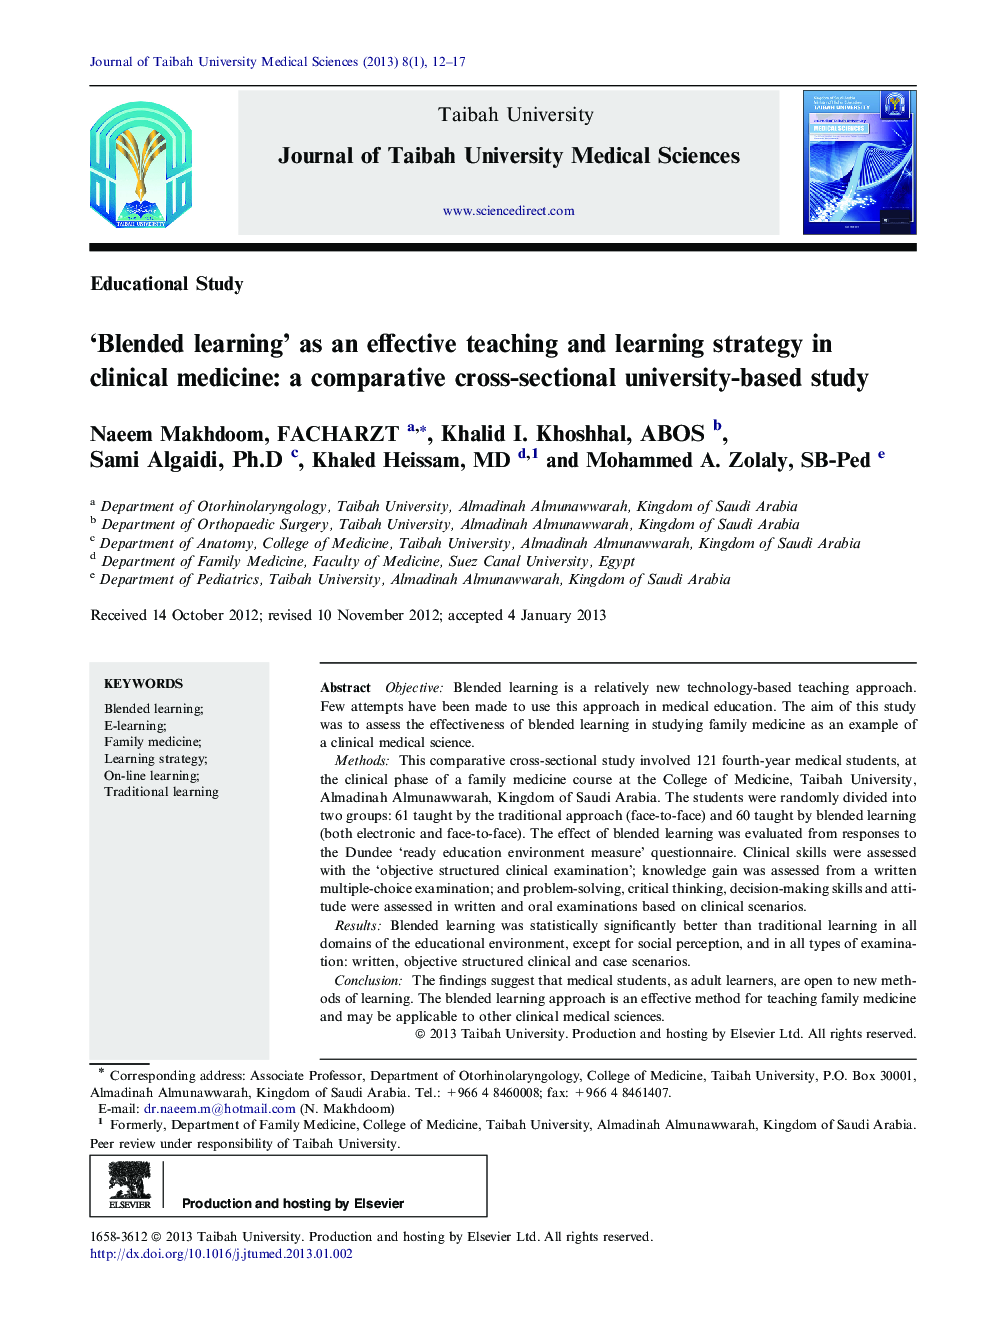 ‘Blended learning’ as an effective teaching and learning strategy in clinical medicine: a comparative cross-sectional university-based study 